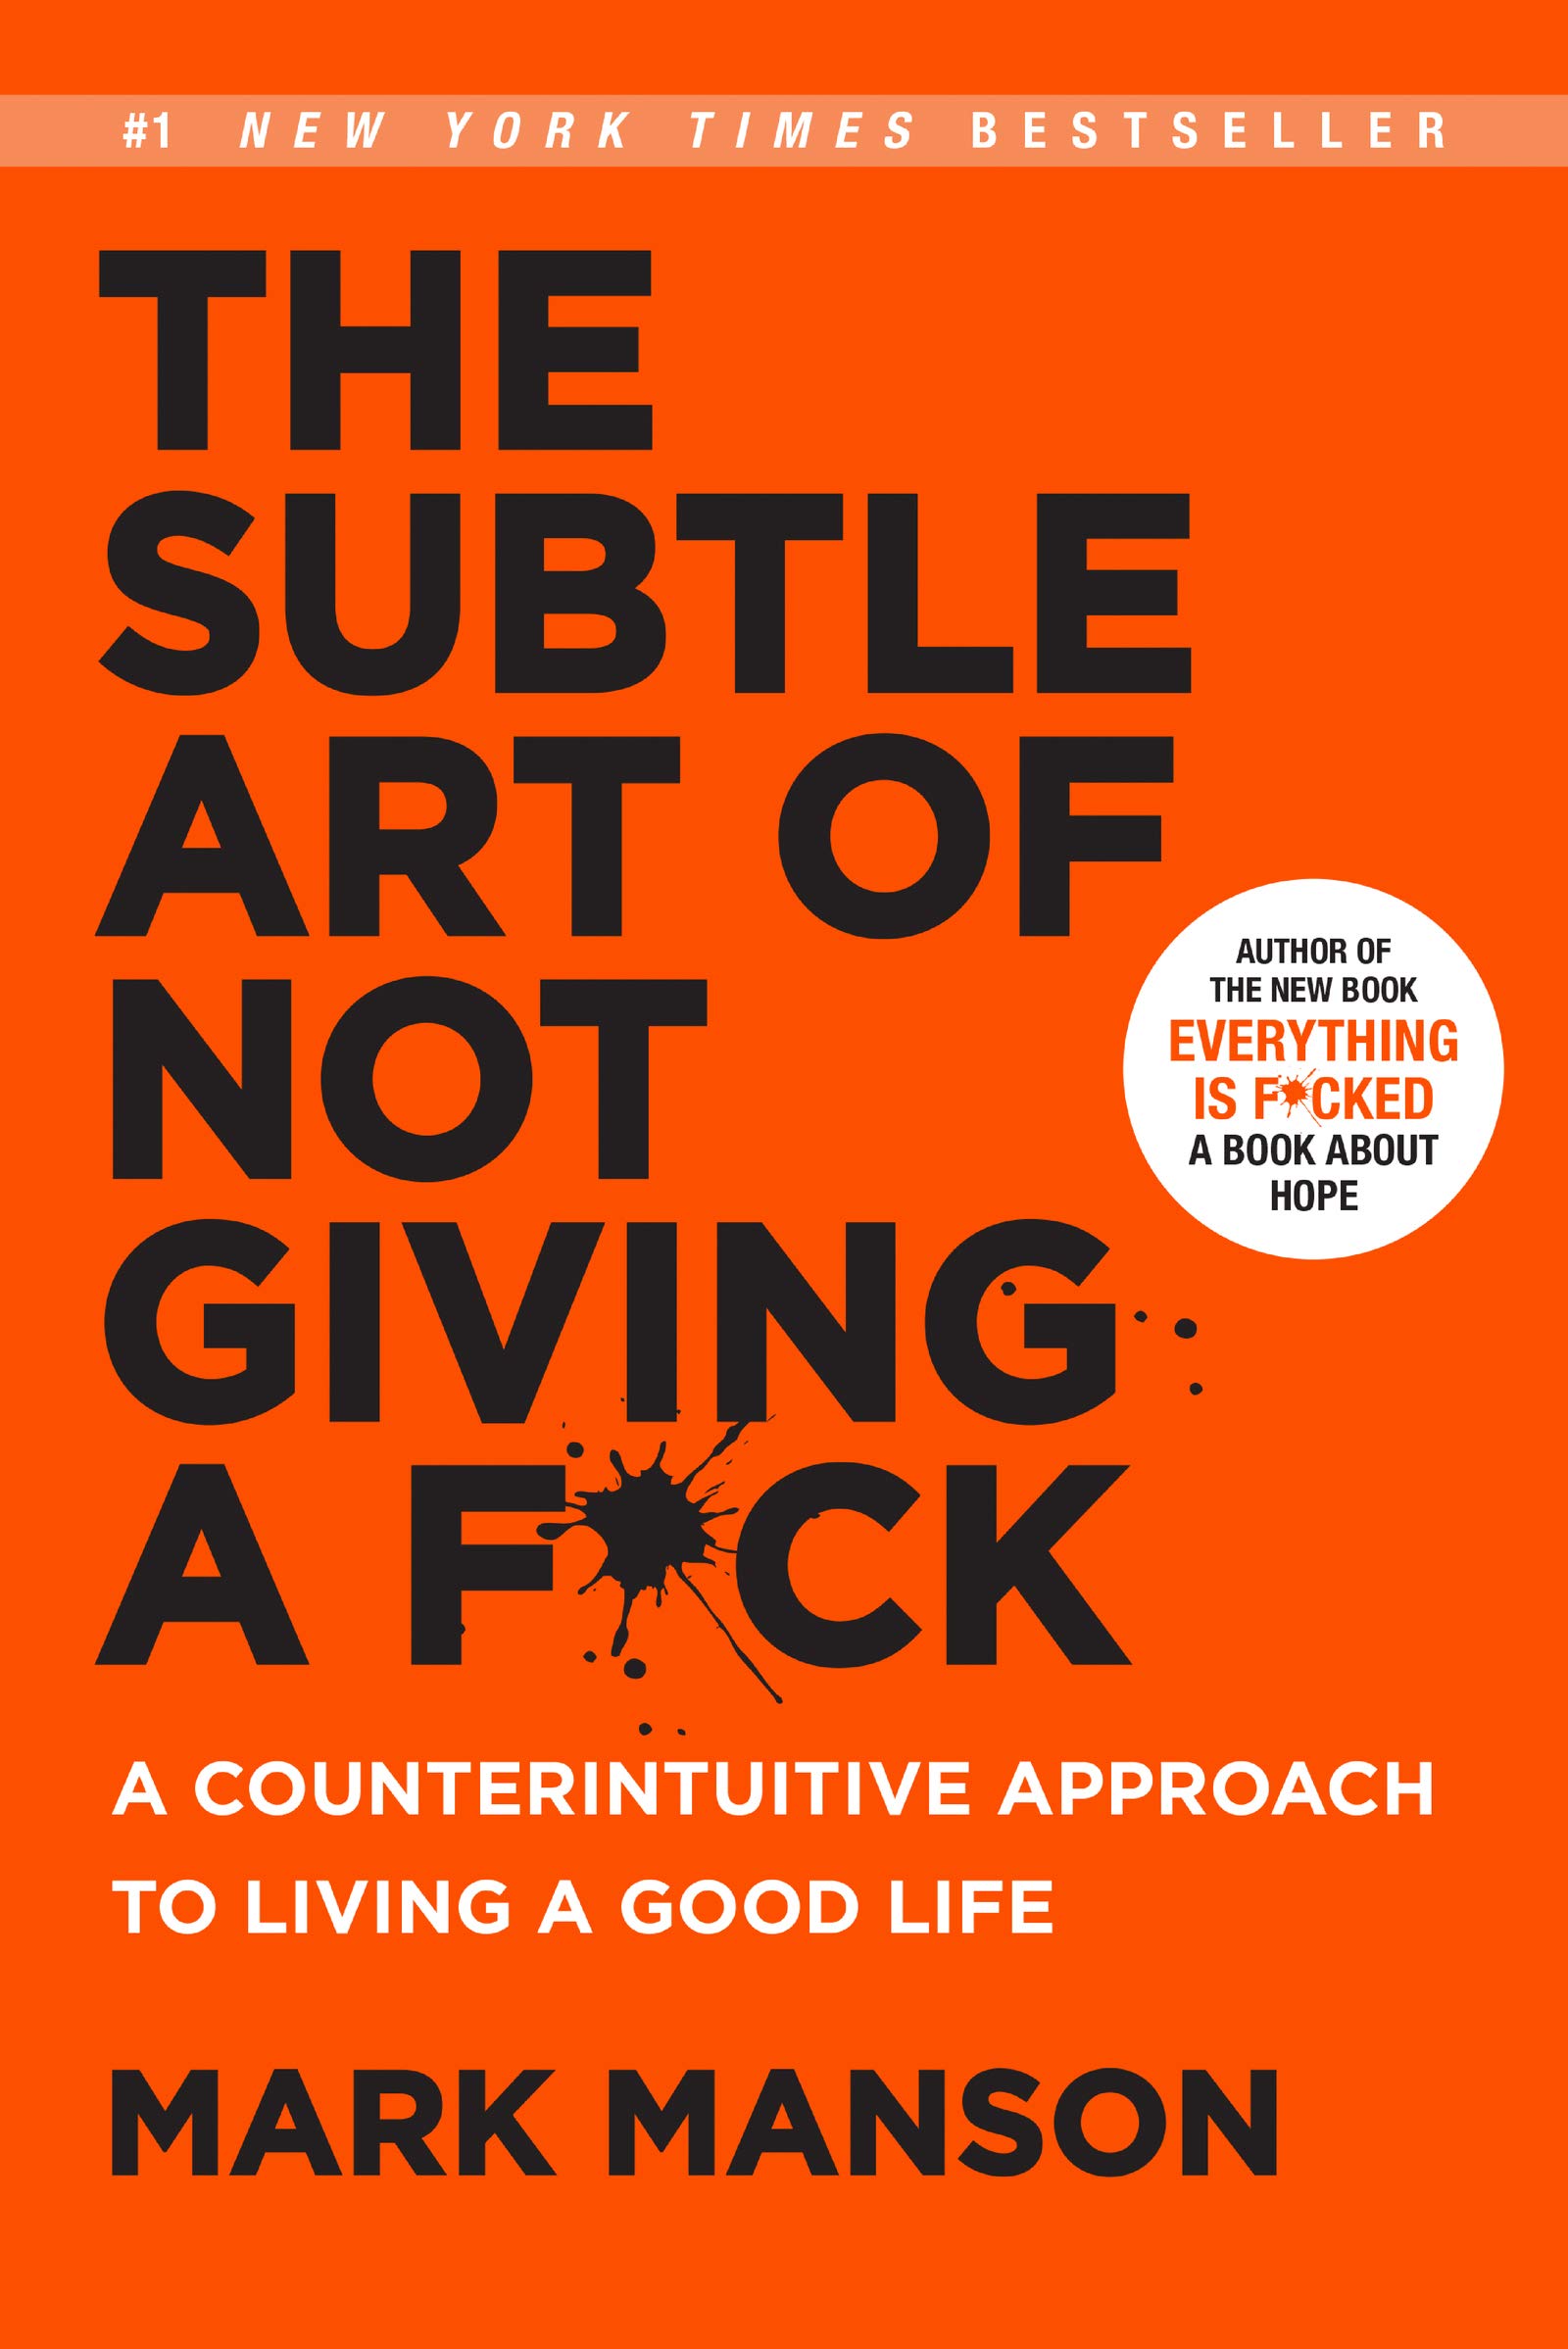 The Subtle Art Of Not Giving A Fck by Mark Manson